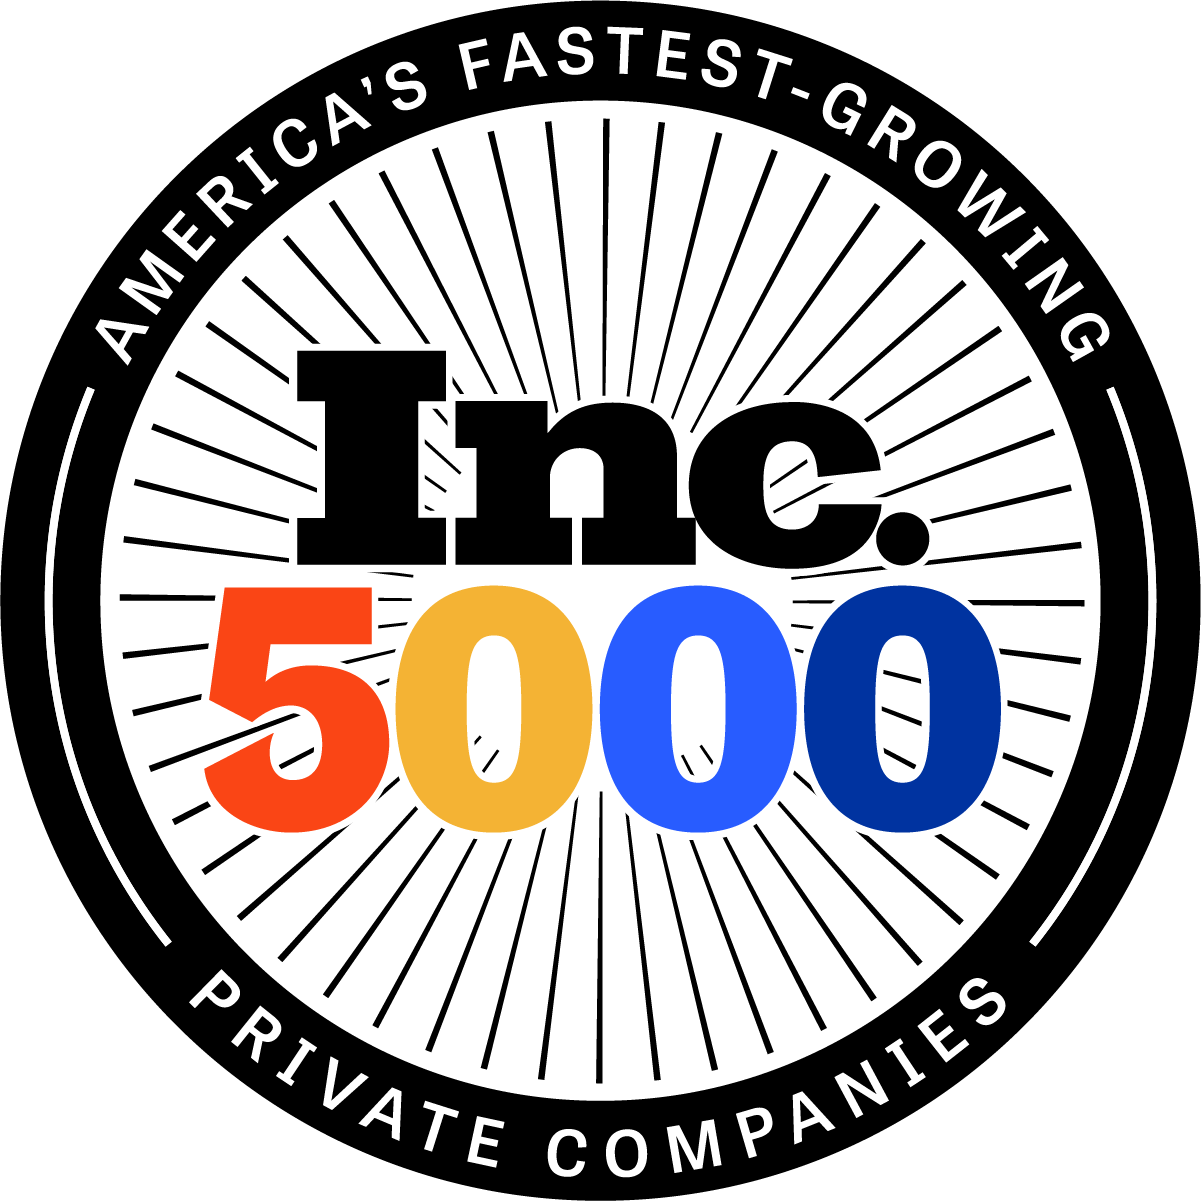 Funding Forward Joins the Inc. 5000 As One of the Fasting Growing U.S. Companies